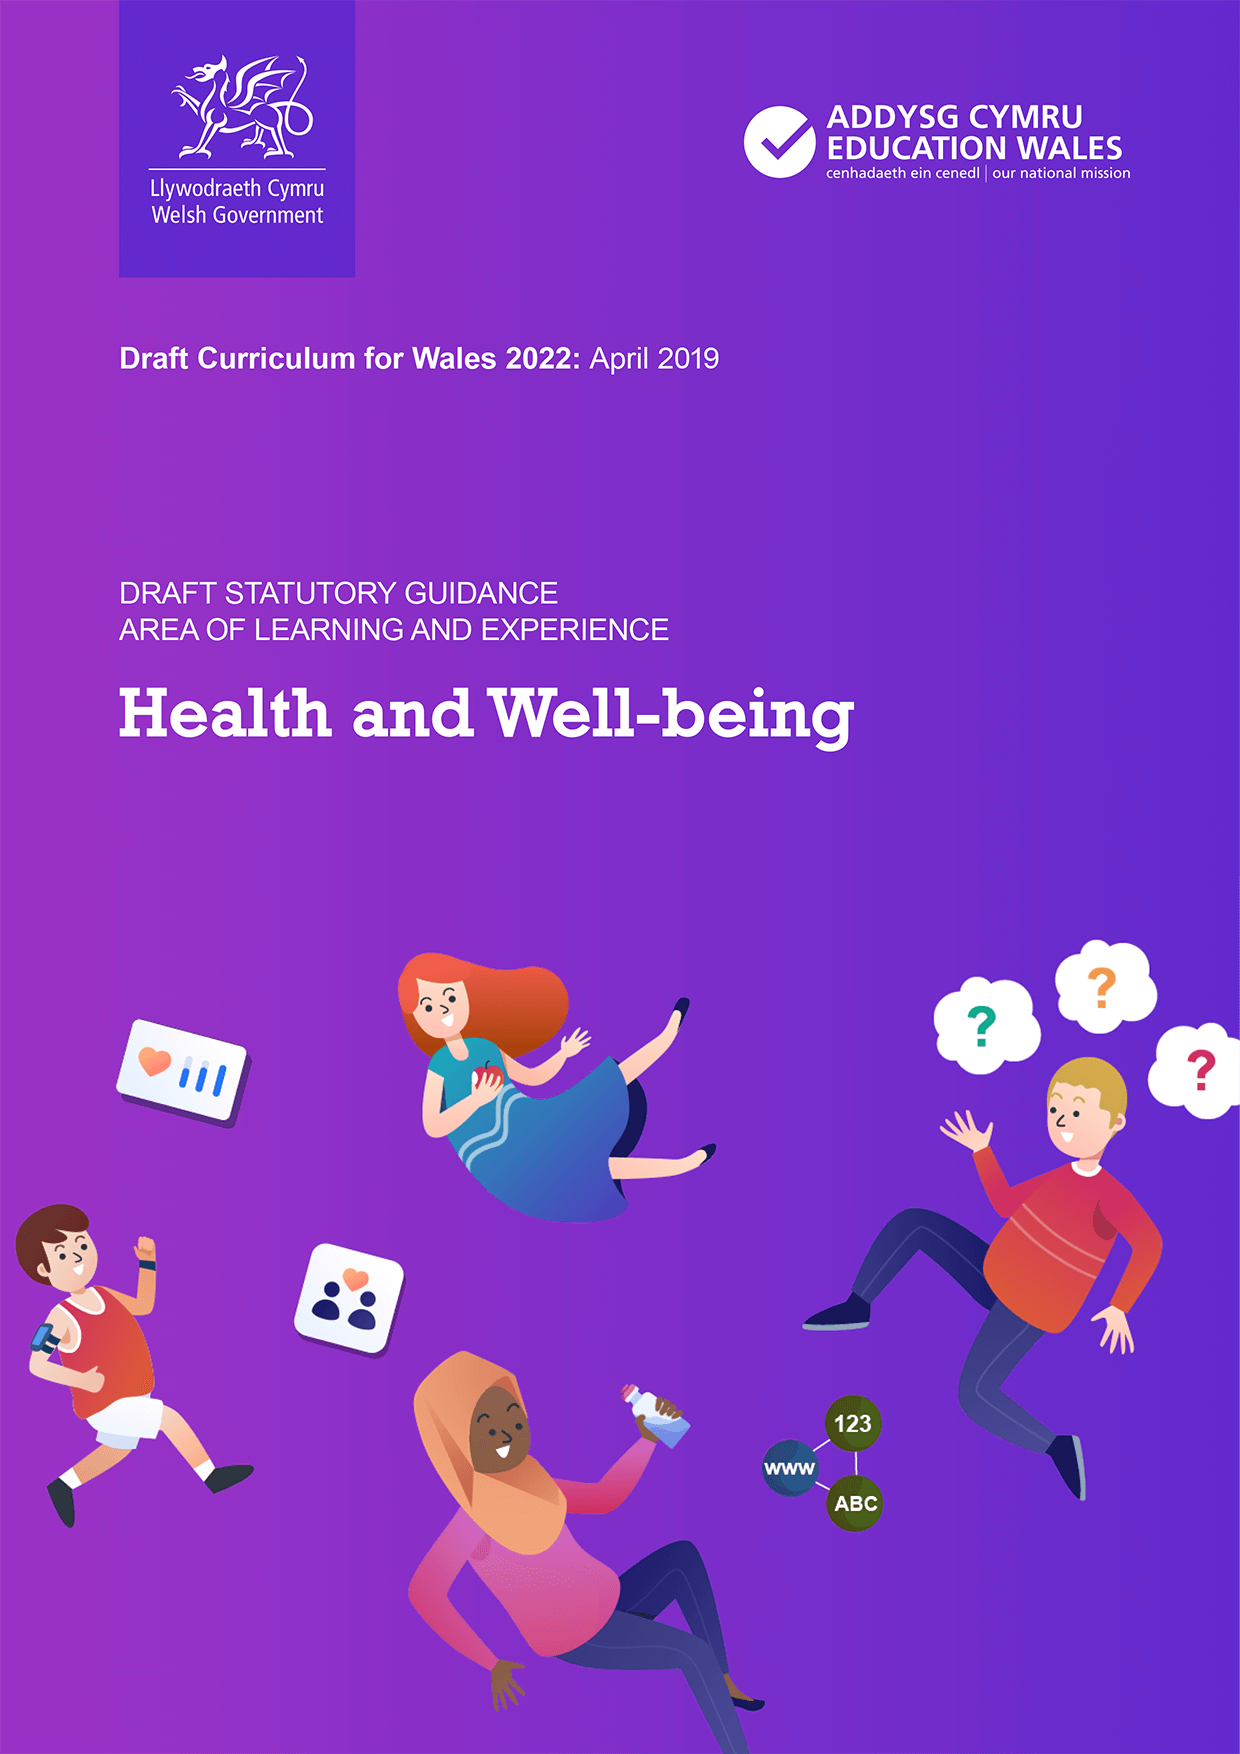 Draft Curriculum for Wales 2022 – Area of learning and experience – Health and Well-being